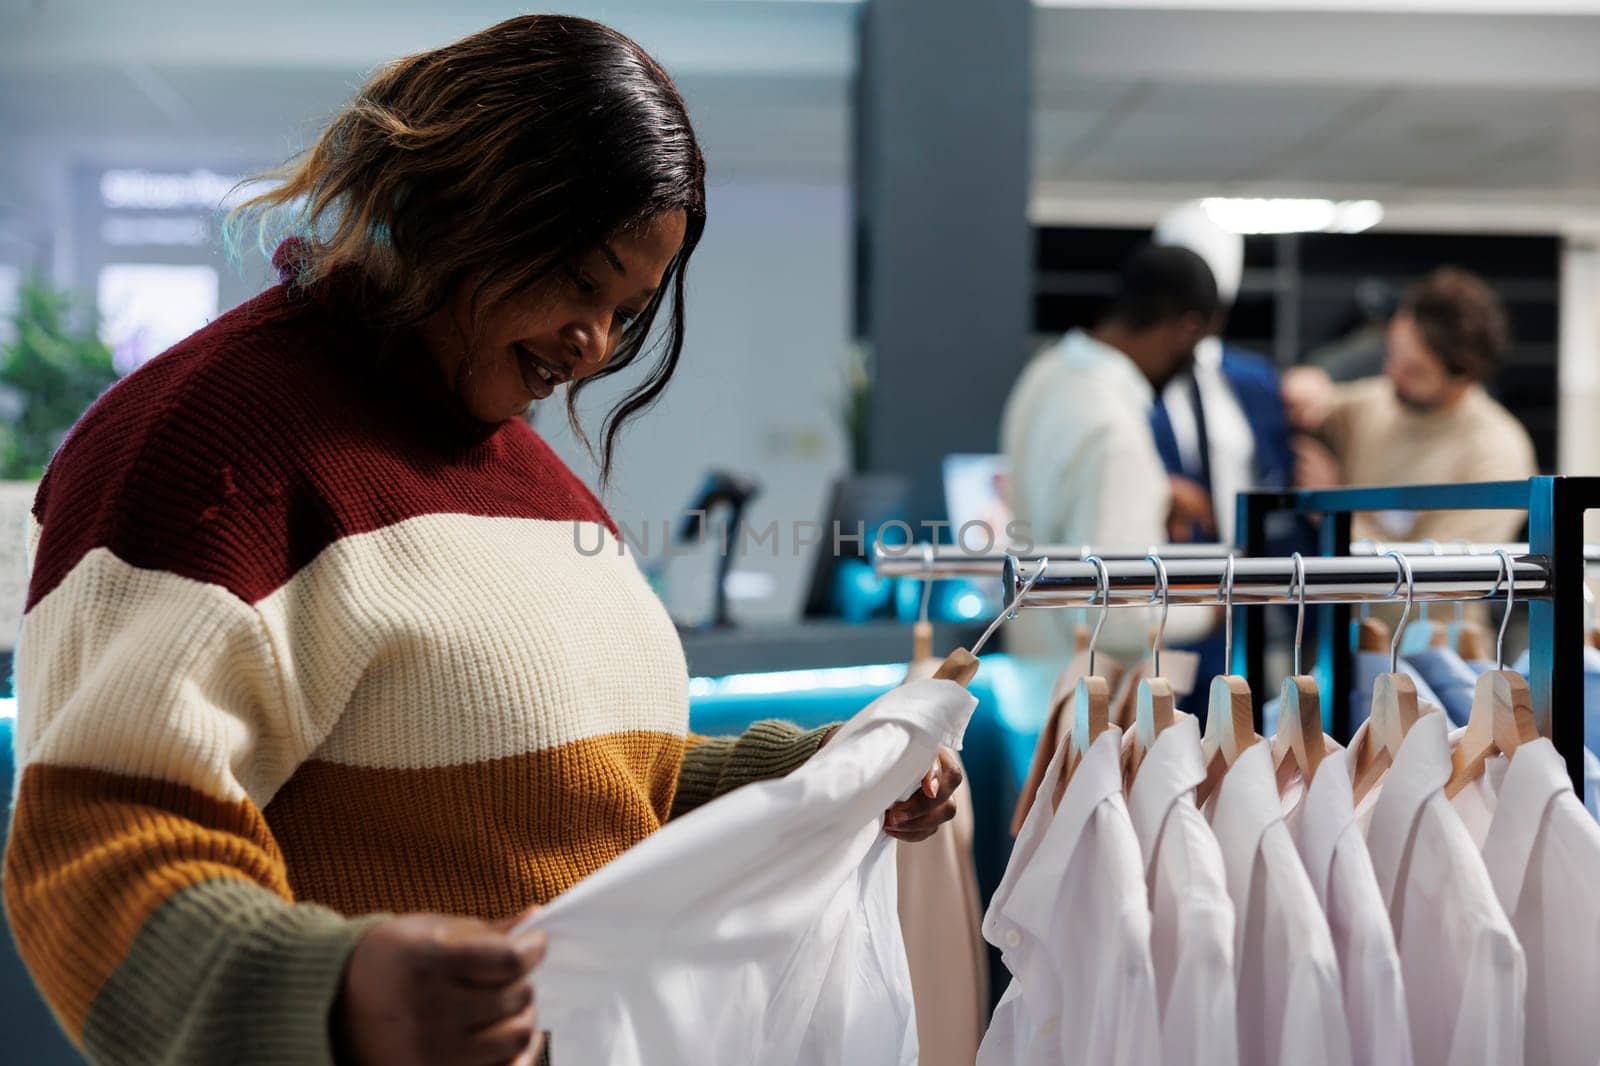 Clothing store buyer examining white shirt fabric quality, checking fit. African american woman browsing rack with hanging formal wear and selecting apparel size in boutique